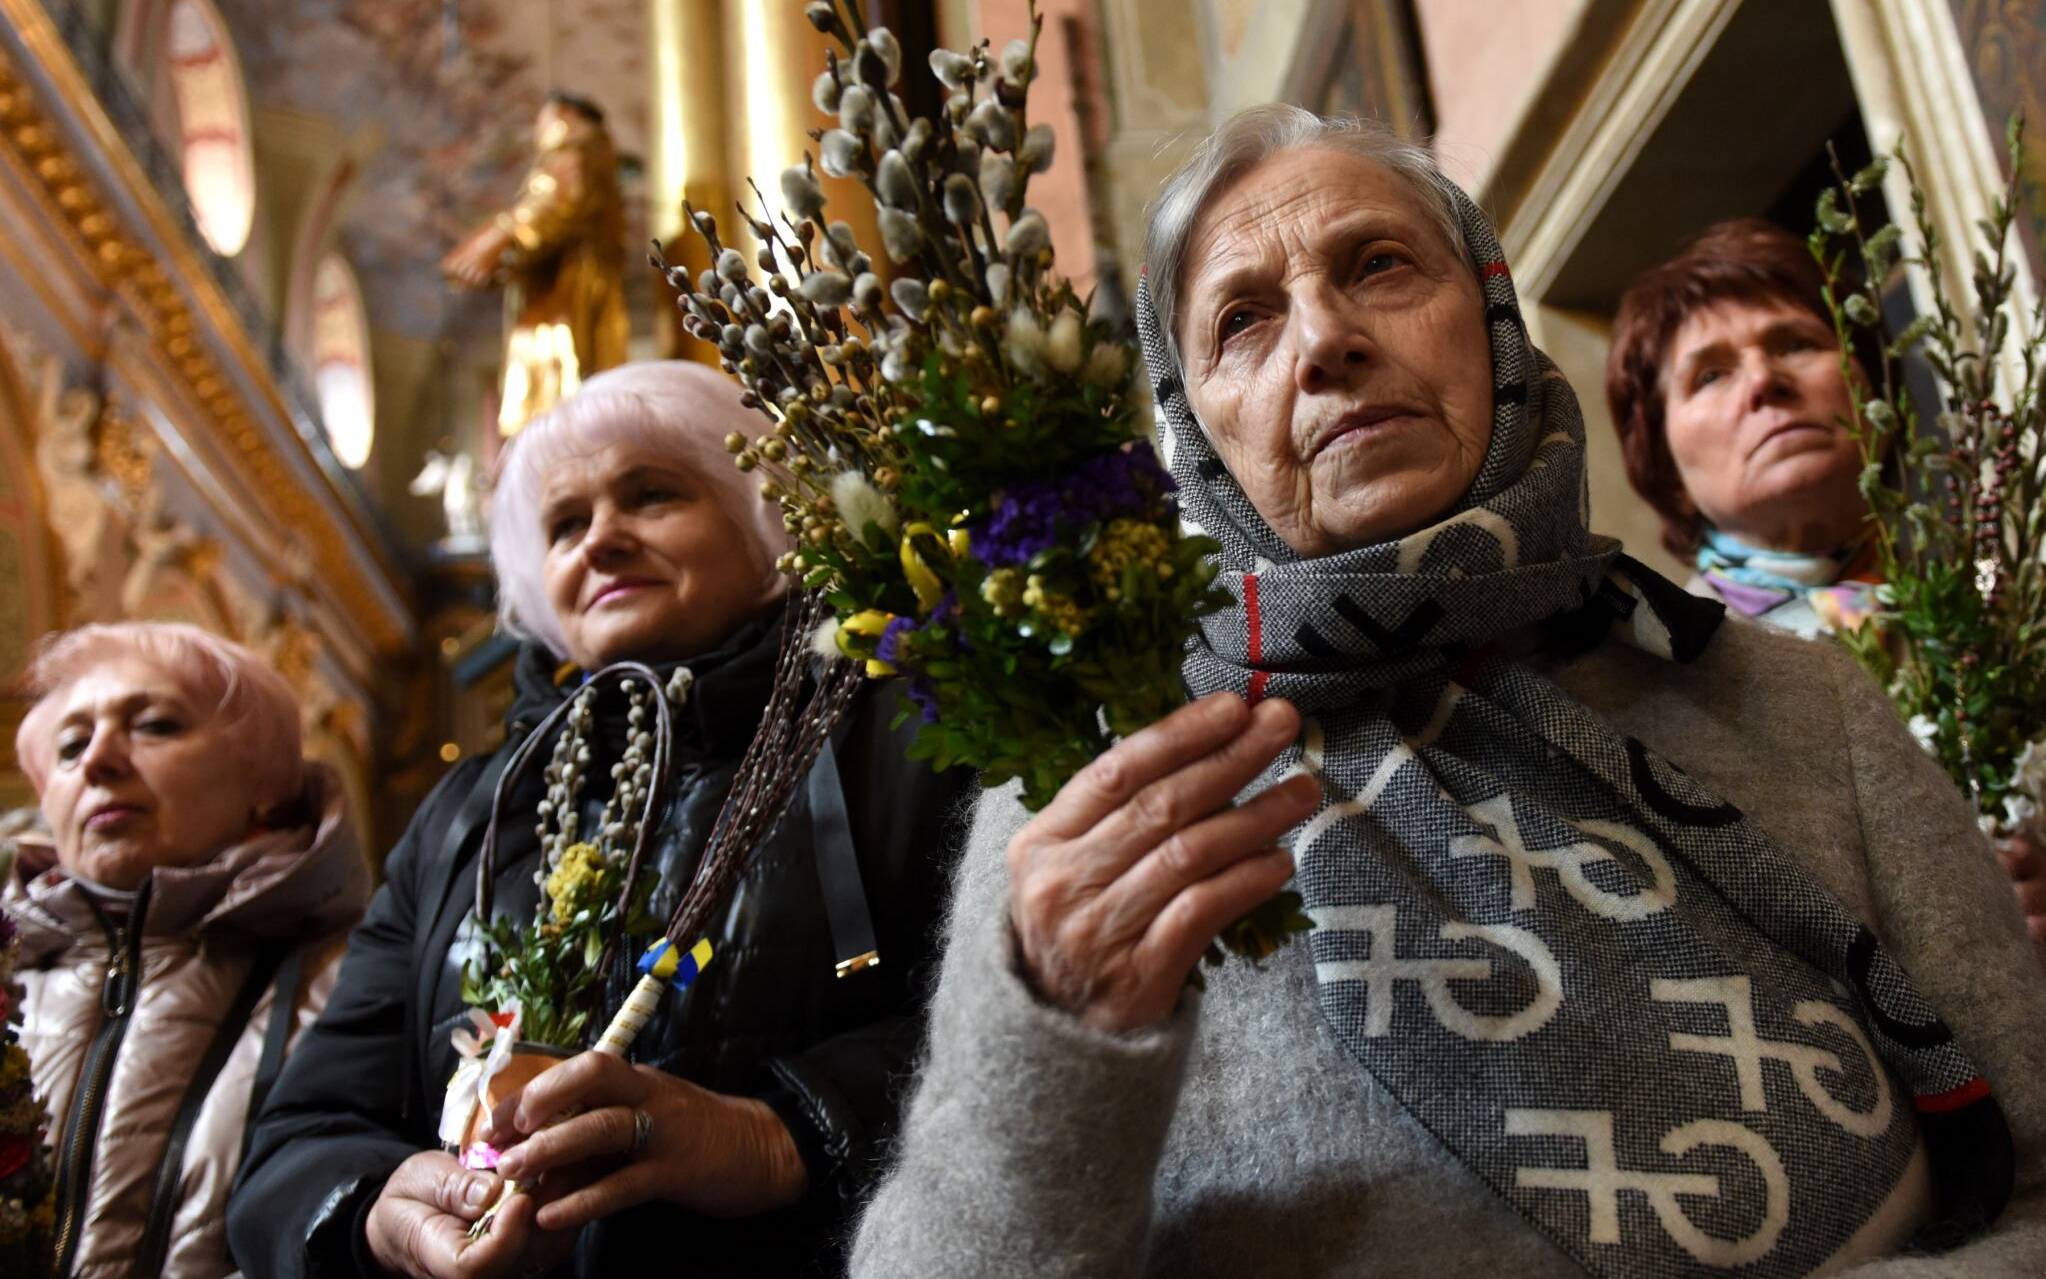 Worshippers take part in an Orthodox Palm Sunday service at Saints Peter and Paul Garrison Church in the western Ukrainian city of Lviv on April 17, 2022, amid the Russian invasion of Ukraine. (Photo by Yuriy Dyachyshyn / AFP)